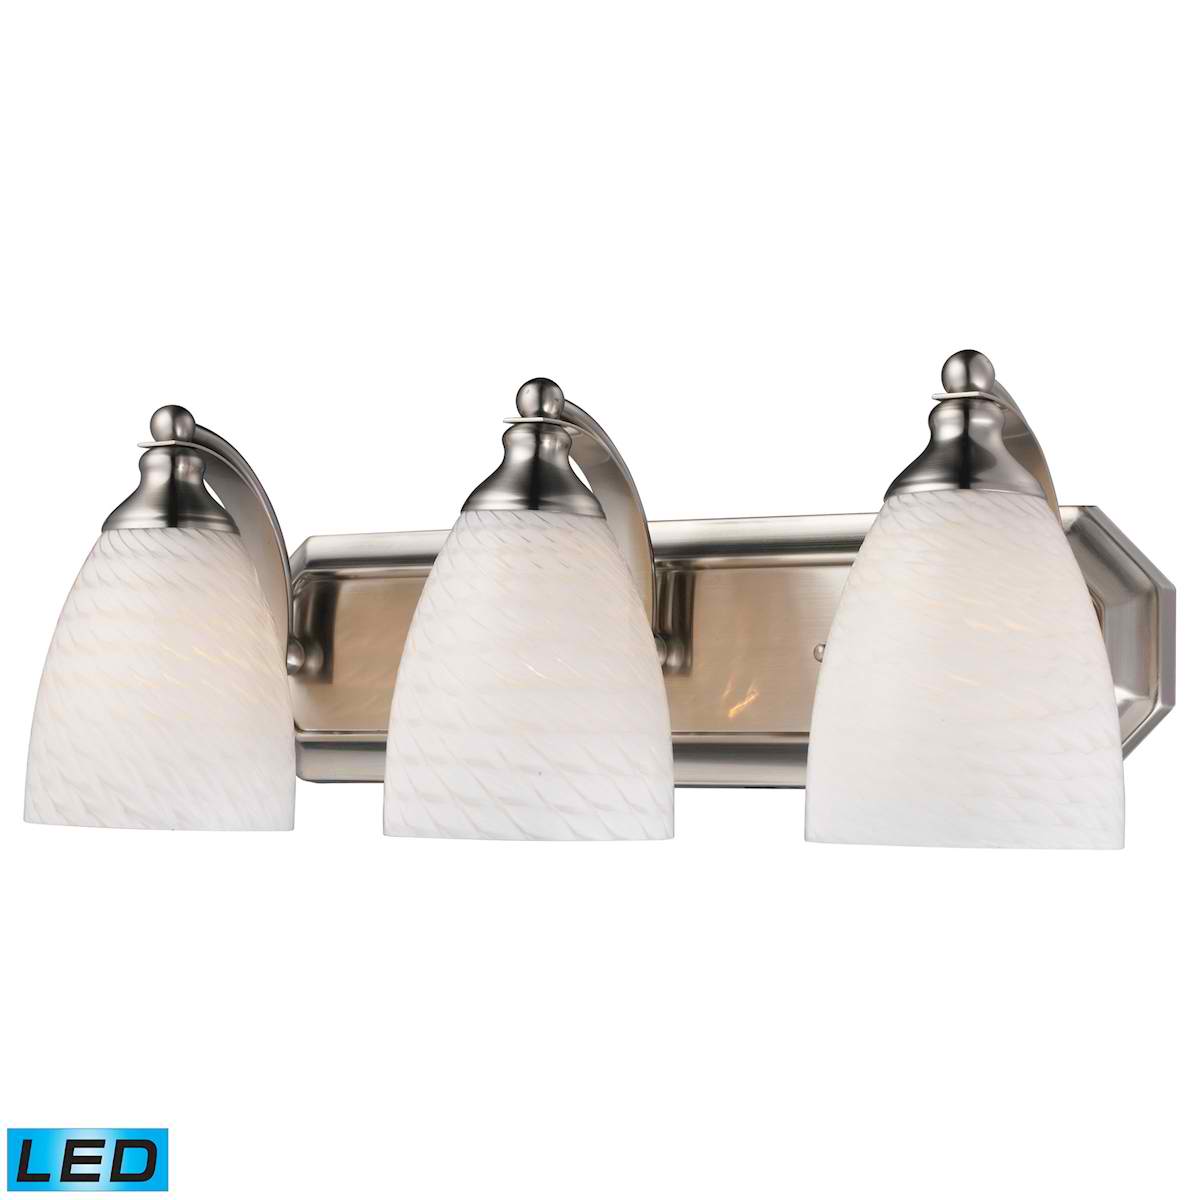 3 Light Vanity in Satin Nickel and White Swirl Glass - LED, 800 Lumens (2400 Lumens Total) with Full Scale